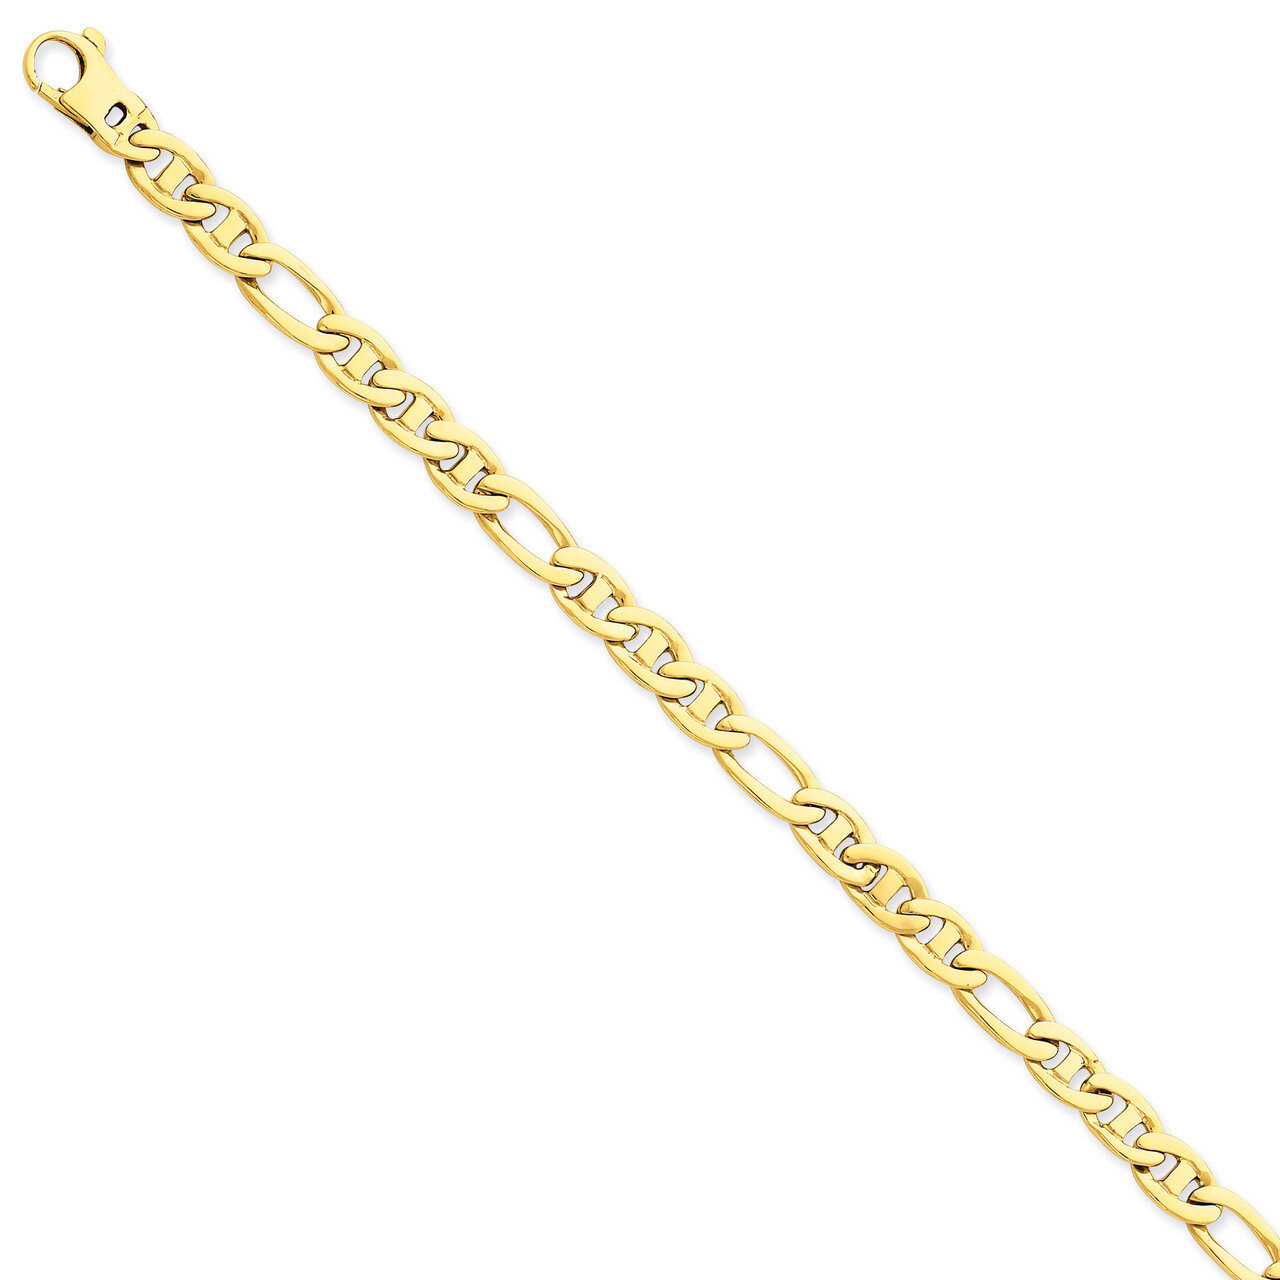 6.5mm Solid Hand-Polished 3 & 1 Flat Anchor Chain 7.25 Inch 14k Gold FL438-7.25